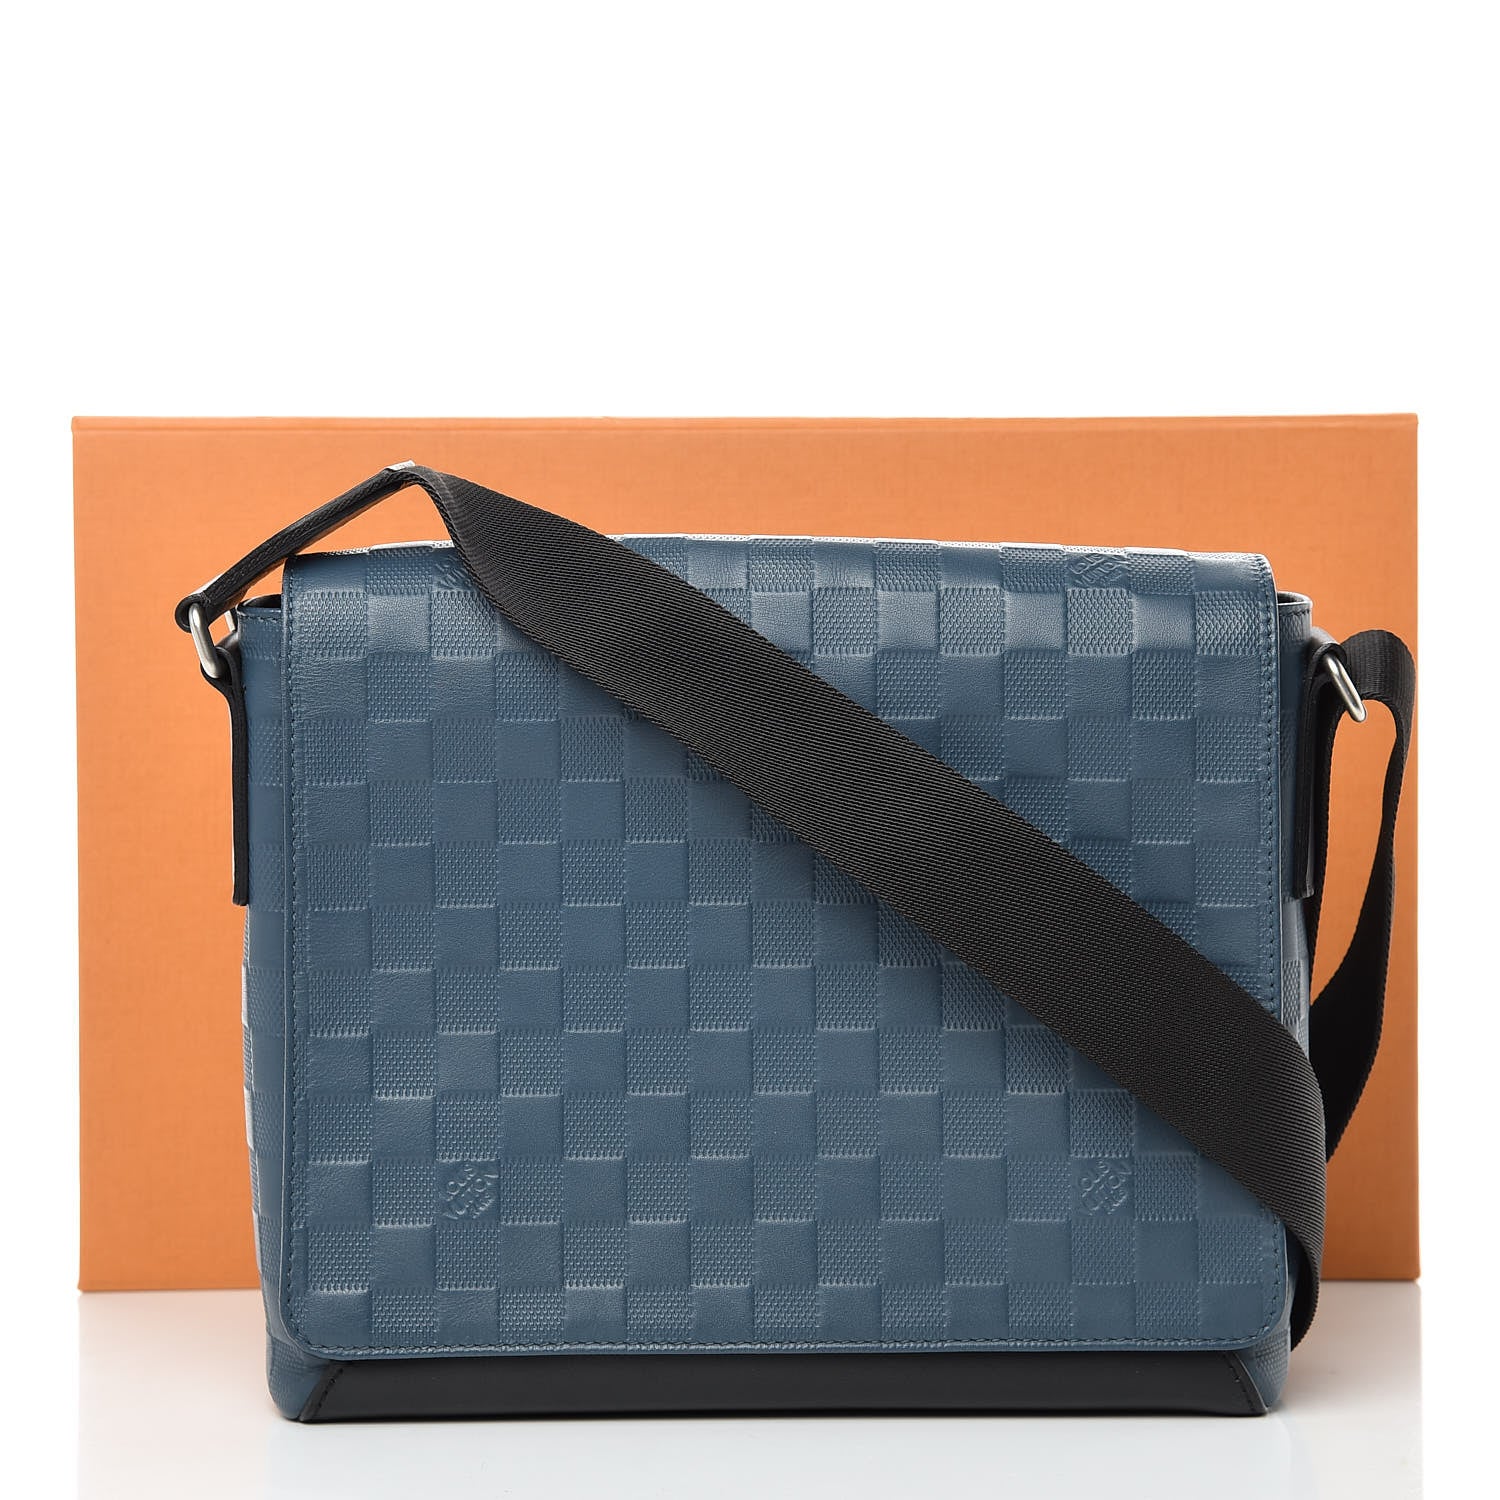 Louis Vuitton Launches Damier Infini Line of Men's Leather Goods - Racked